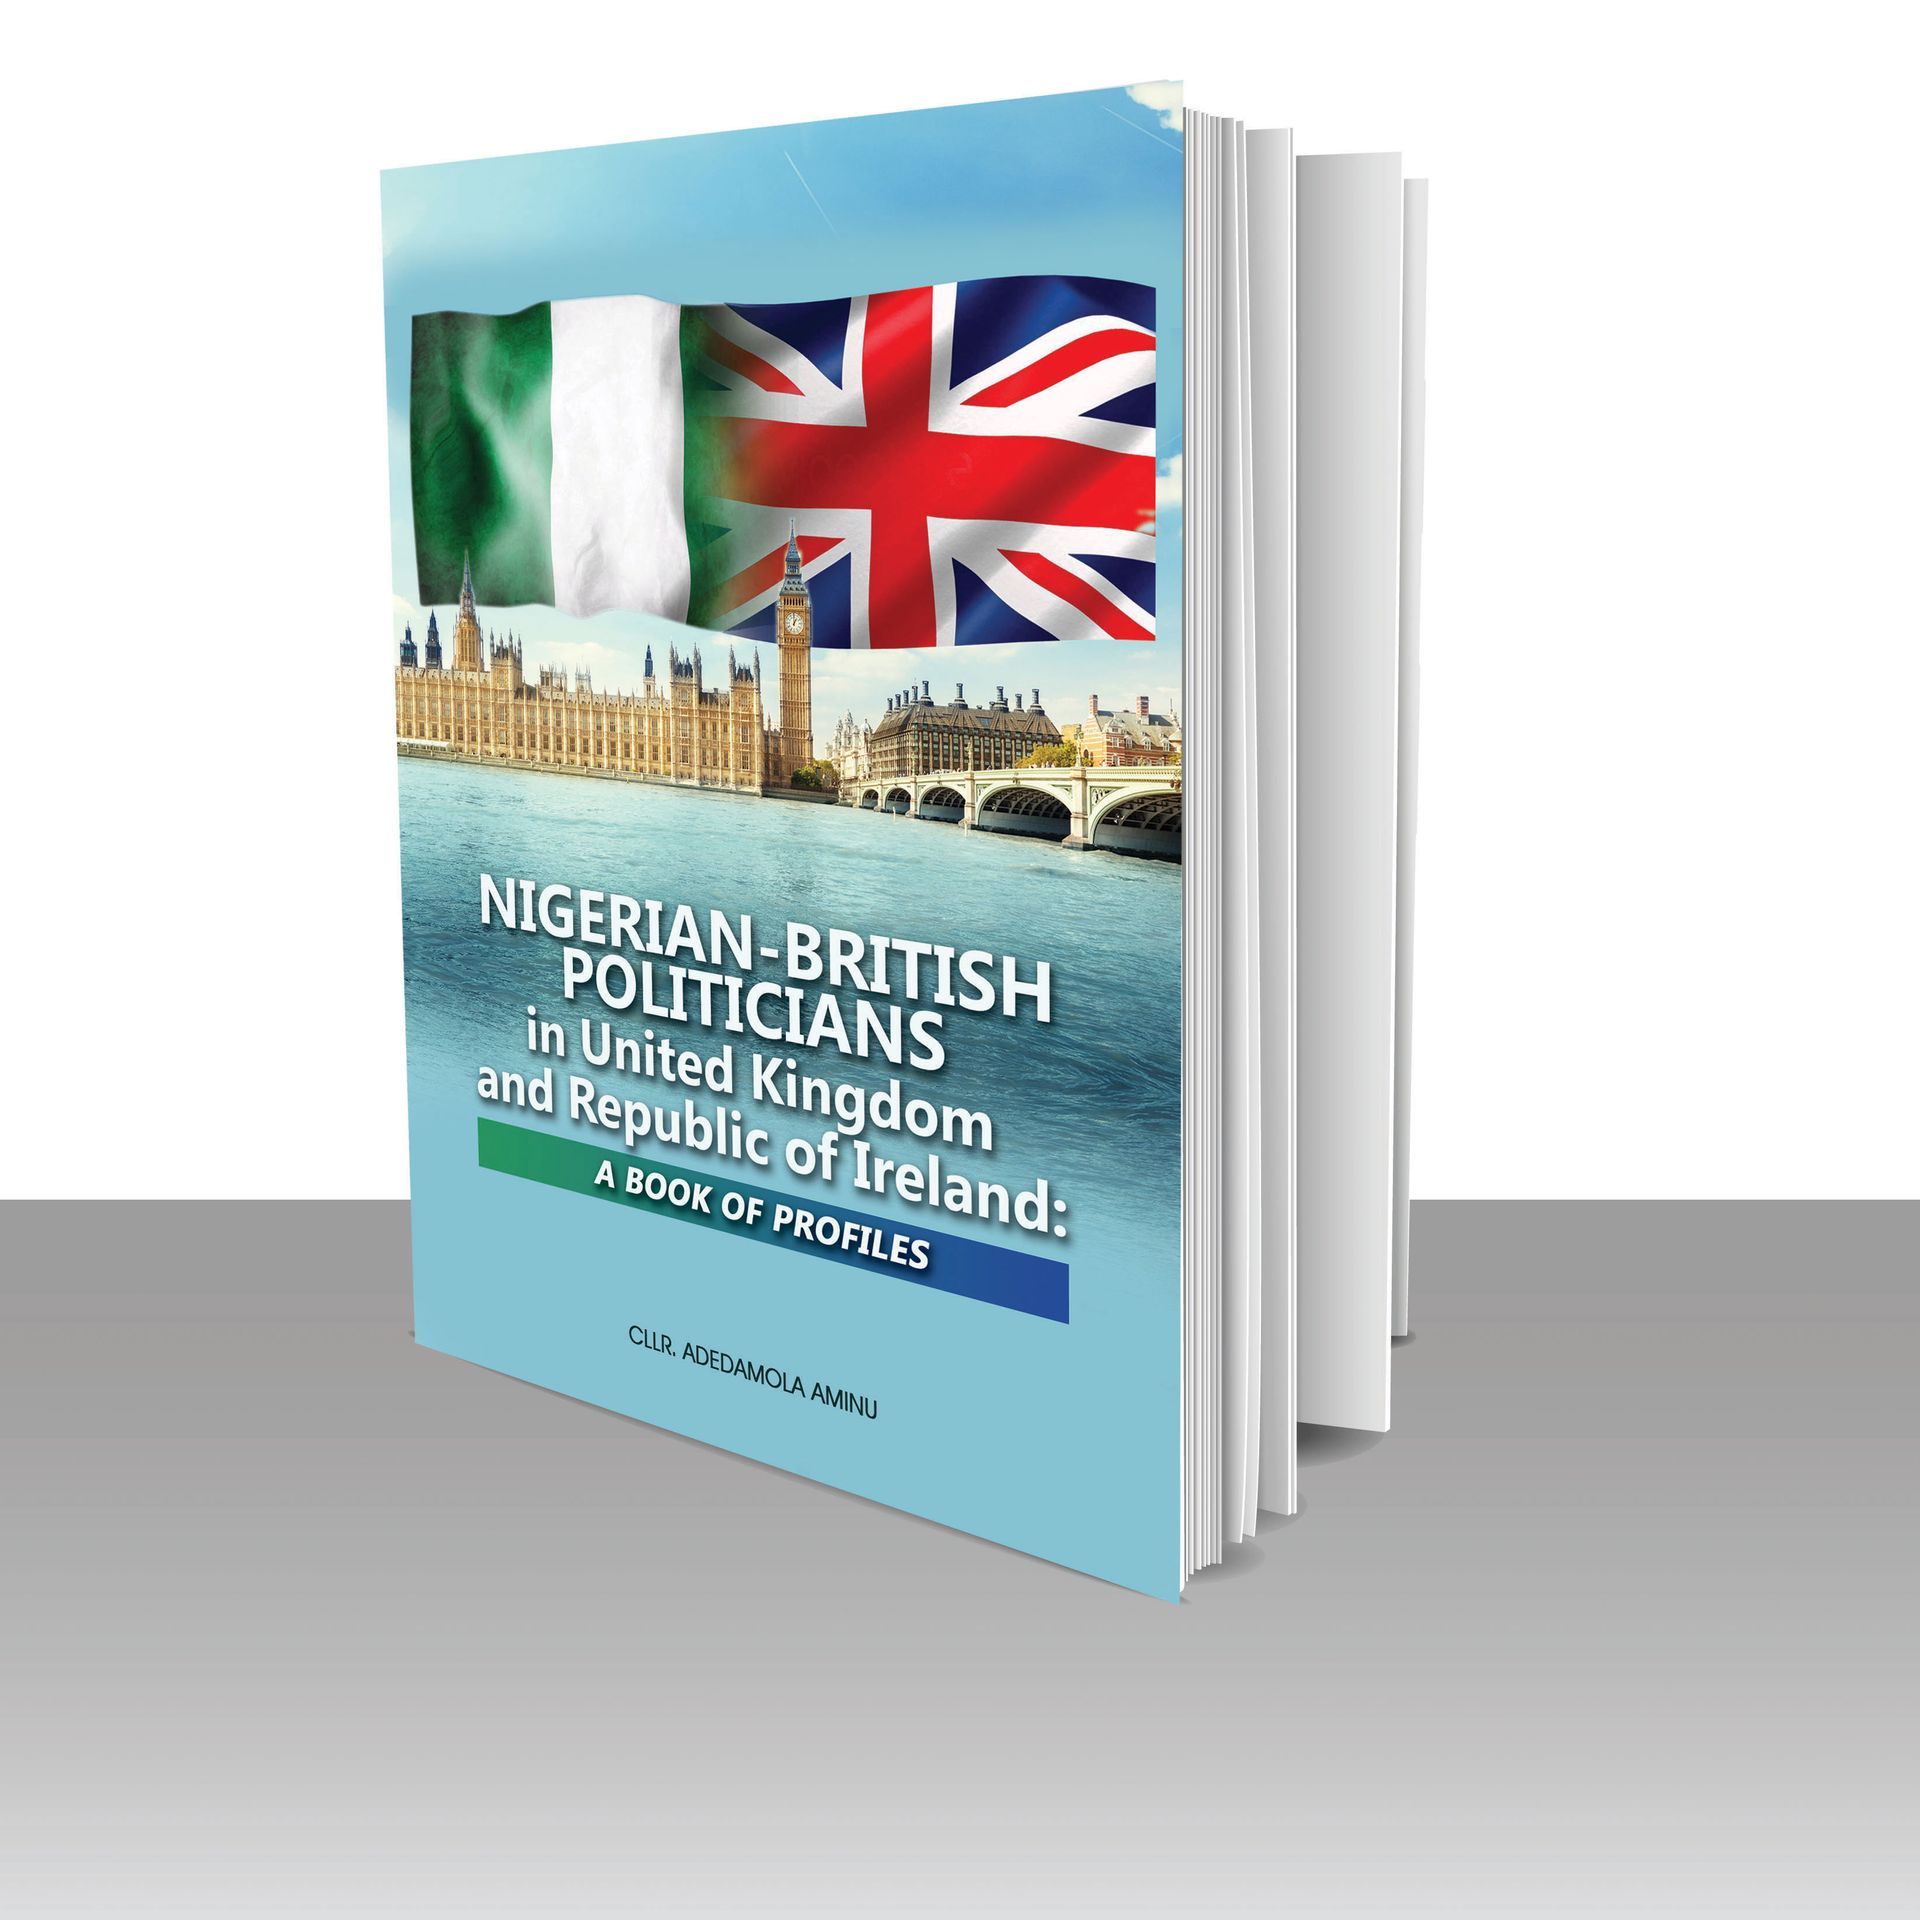 At the book presentation of Nigerian-British Politicians in the UK and Republic of Ireland